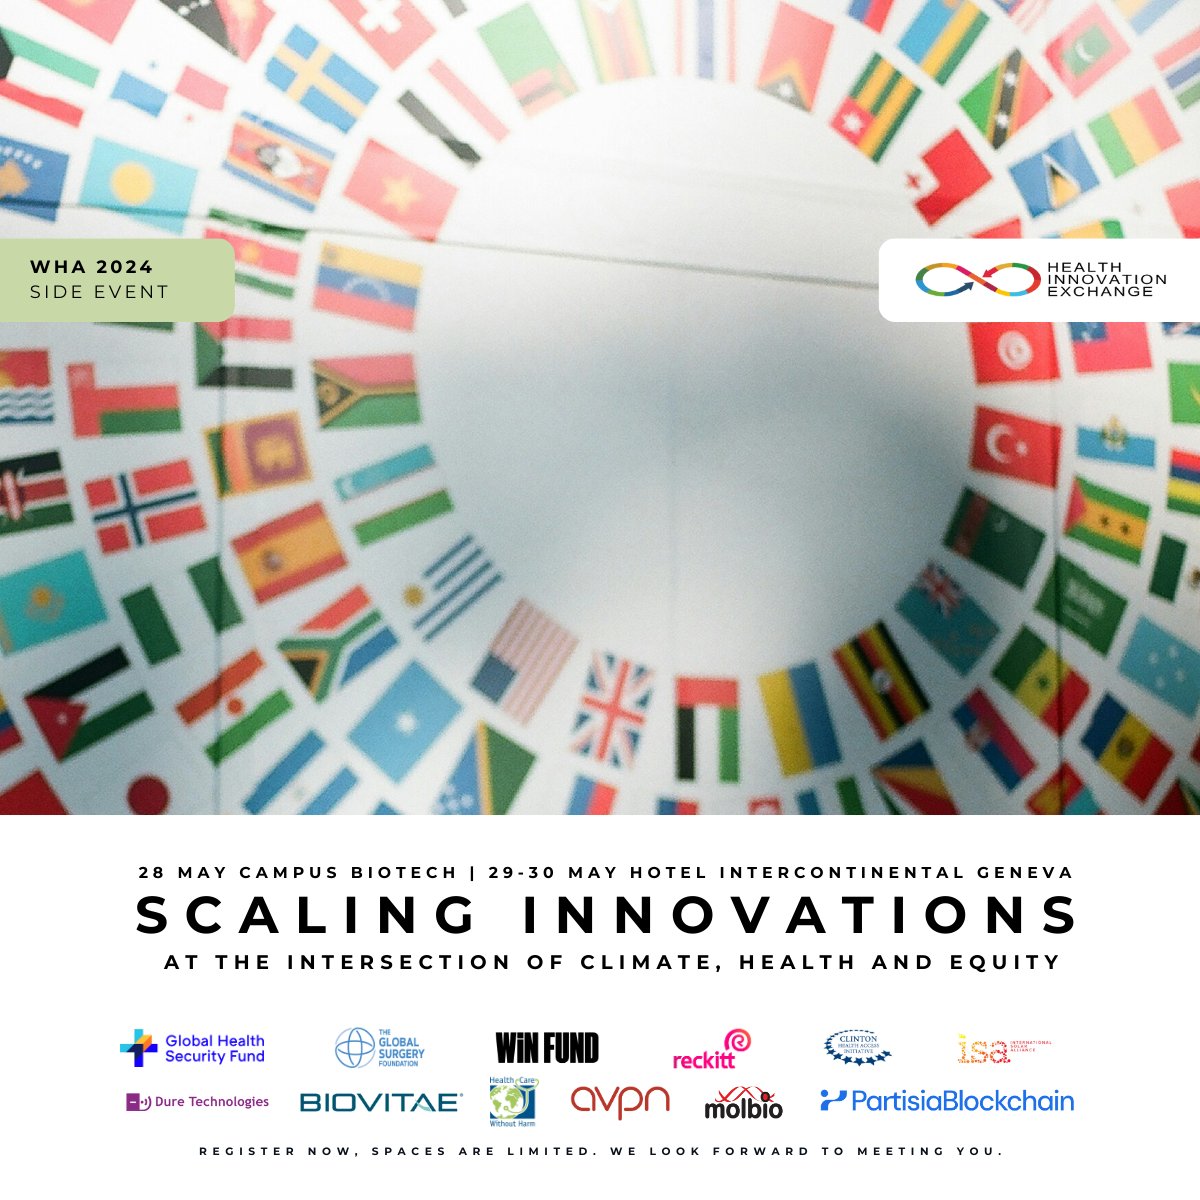 ✨ Join us for 'Scaling Innovations at the Intersection of Climate, Health, and Equity' ✨ 🕗 Date & Time: May 28 - 30, 2024 📍 Location: Campus Biotech + Intercontinental Hotel 🔗 Register Now: hiex.ch/wha77 #ClimateHealthEquity #Innovation #GlobalHealth #WHA77